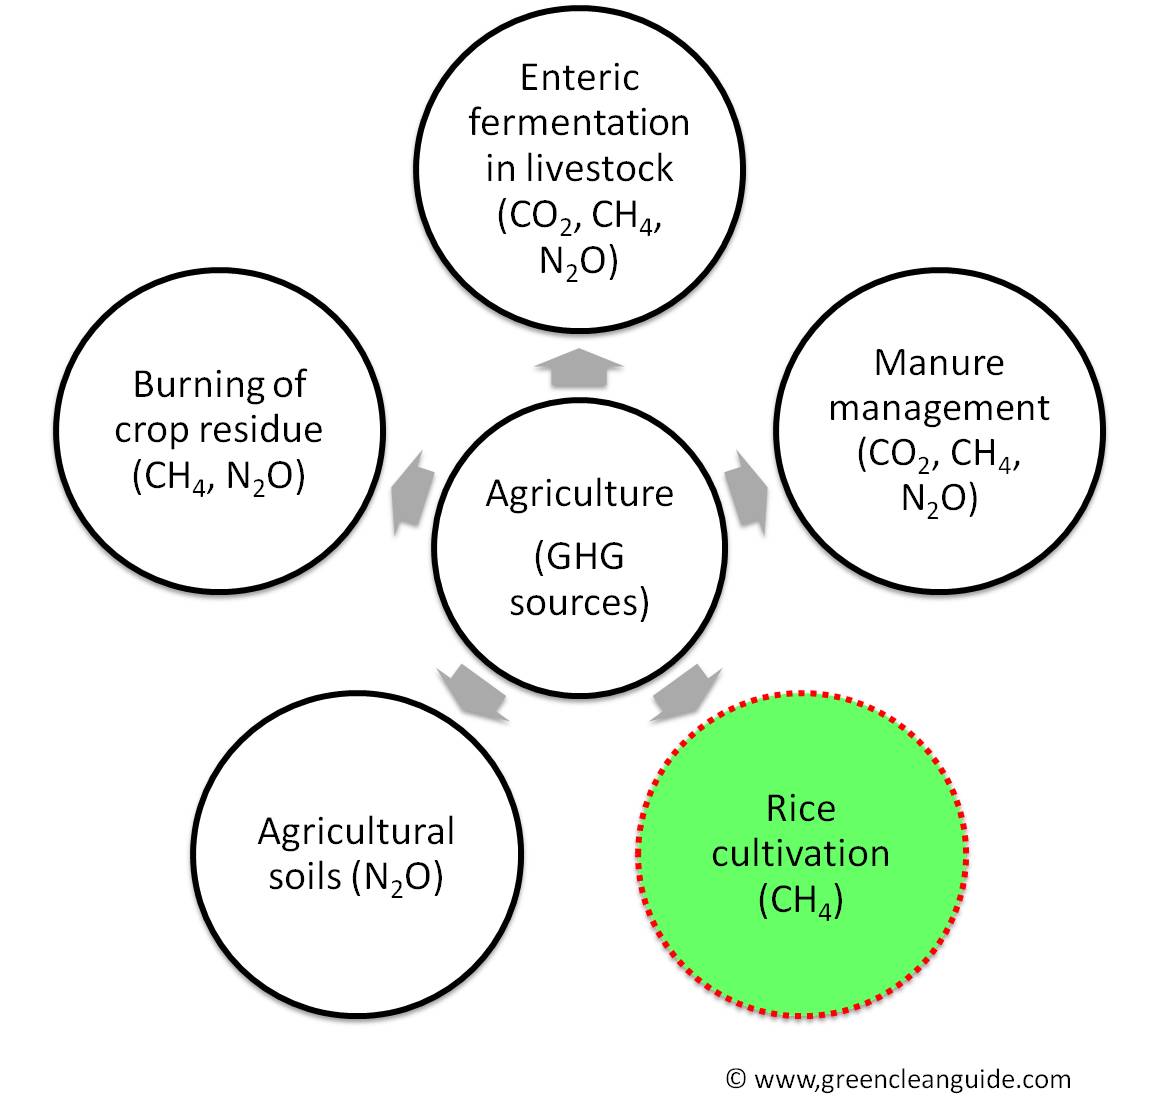 Sources of GHG emission from Agriculture